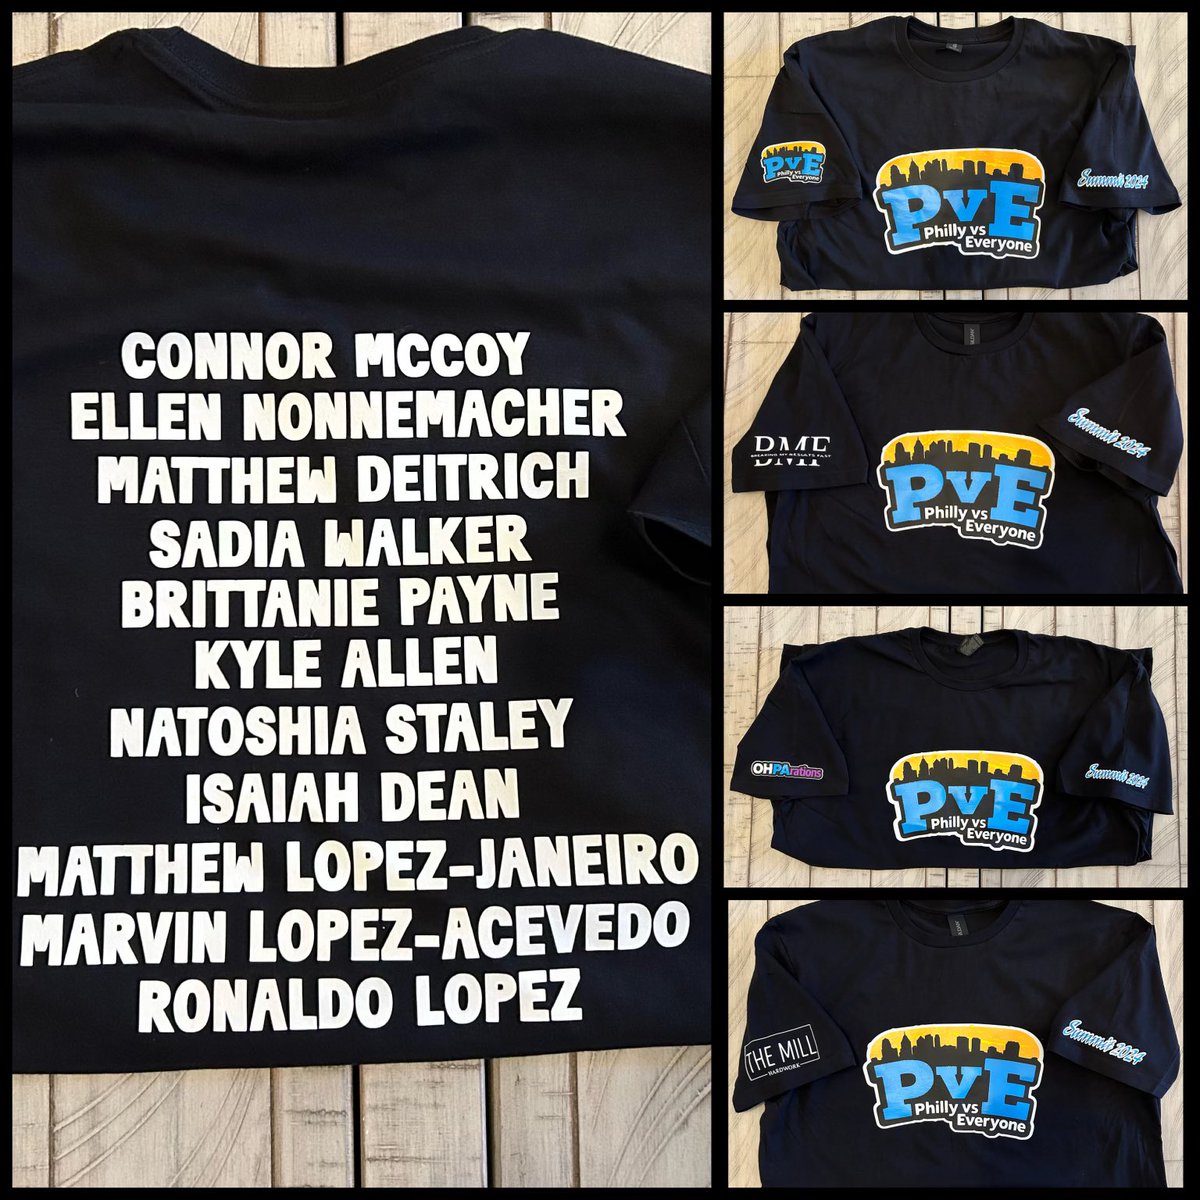 I had the honor of making these rockstar shirts for our PVE summit team! Congrats to all our summit winners! @TeamPVEOHPA @realmccoy1988 Thank you!